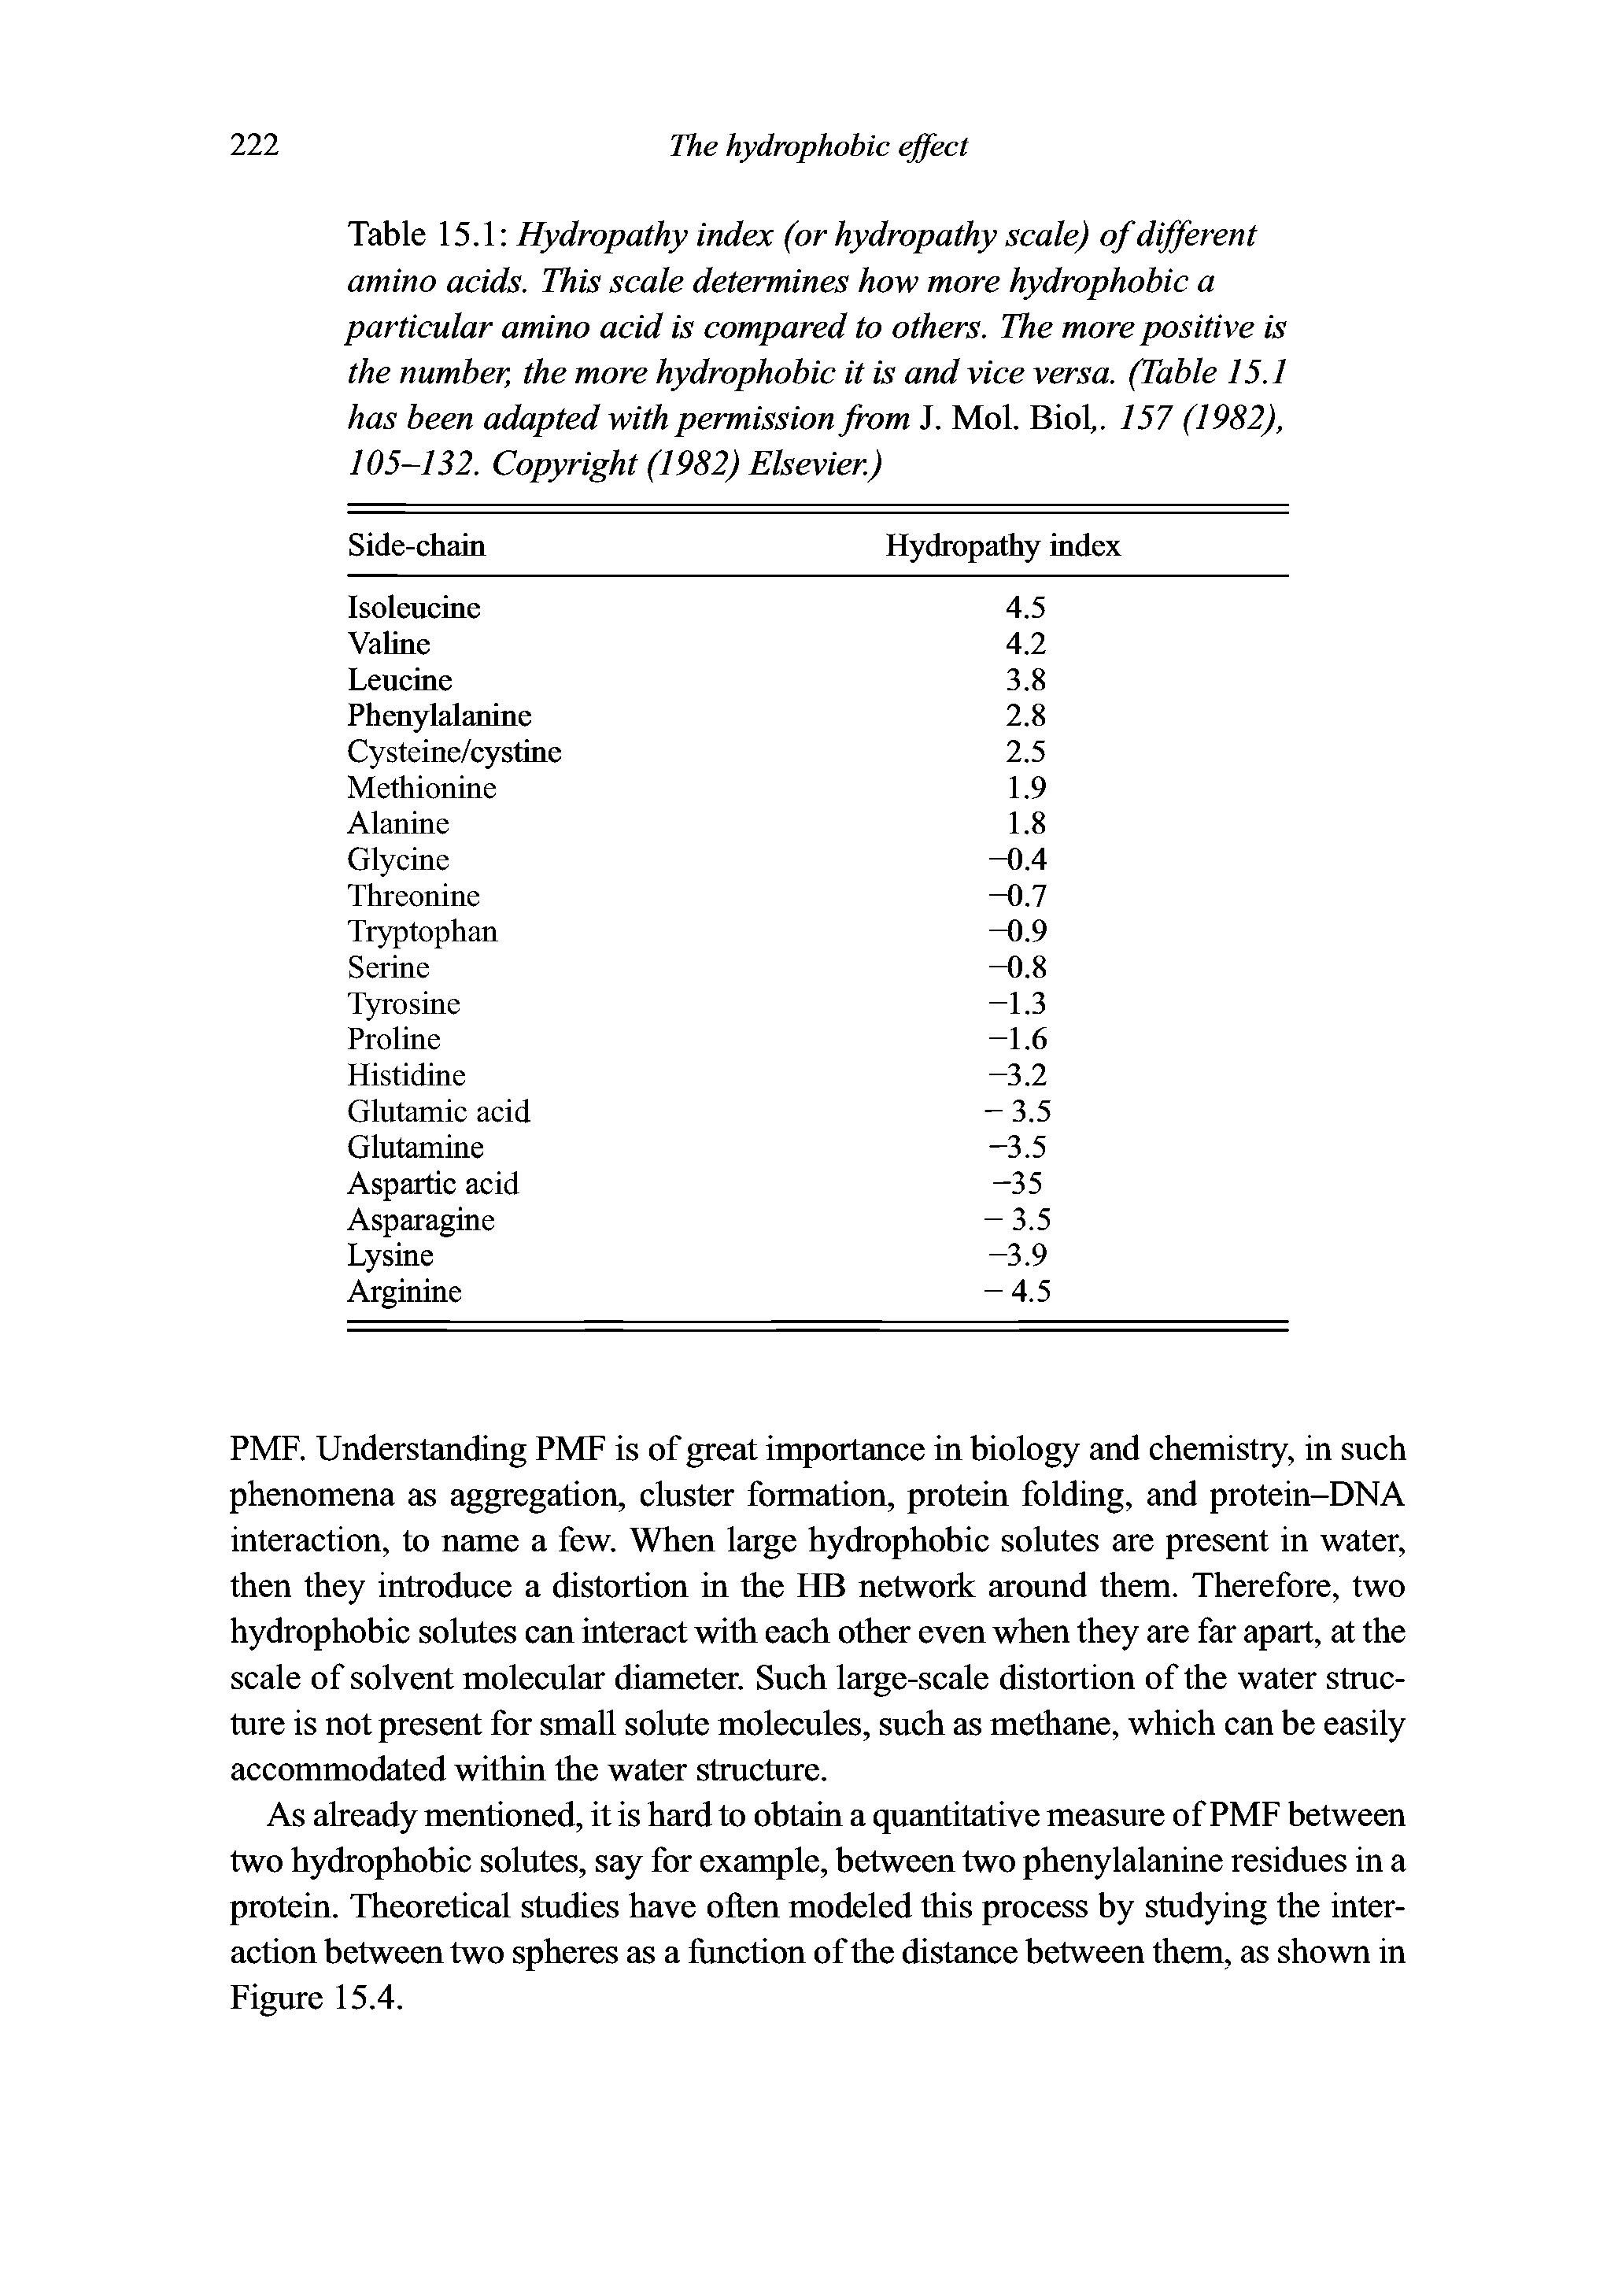 Table 15.1 Hydropathy index (or hydropathy scale) of different amino acids. This scale determines how more hydrophobic a particular amino acid is compared to others. The more positive is the number, the more hydrophobic it is and vice versa. (Table 15.1 has been adapted with permission from J. Mol. Biol,. 157 (1982), 105-132. Copyright (1982) Elsevier.)...